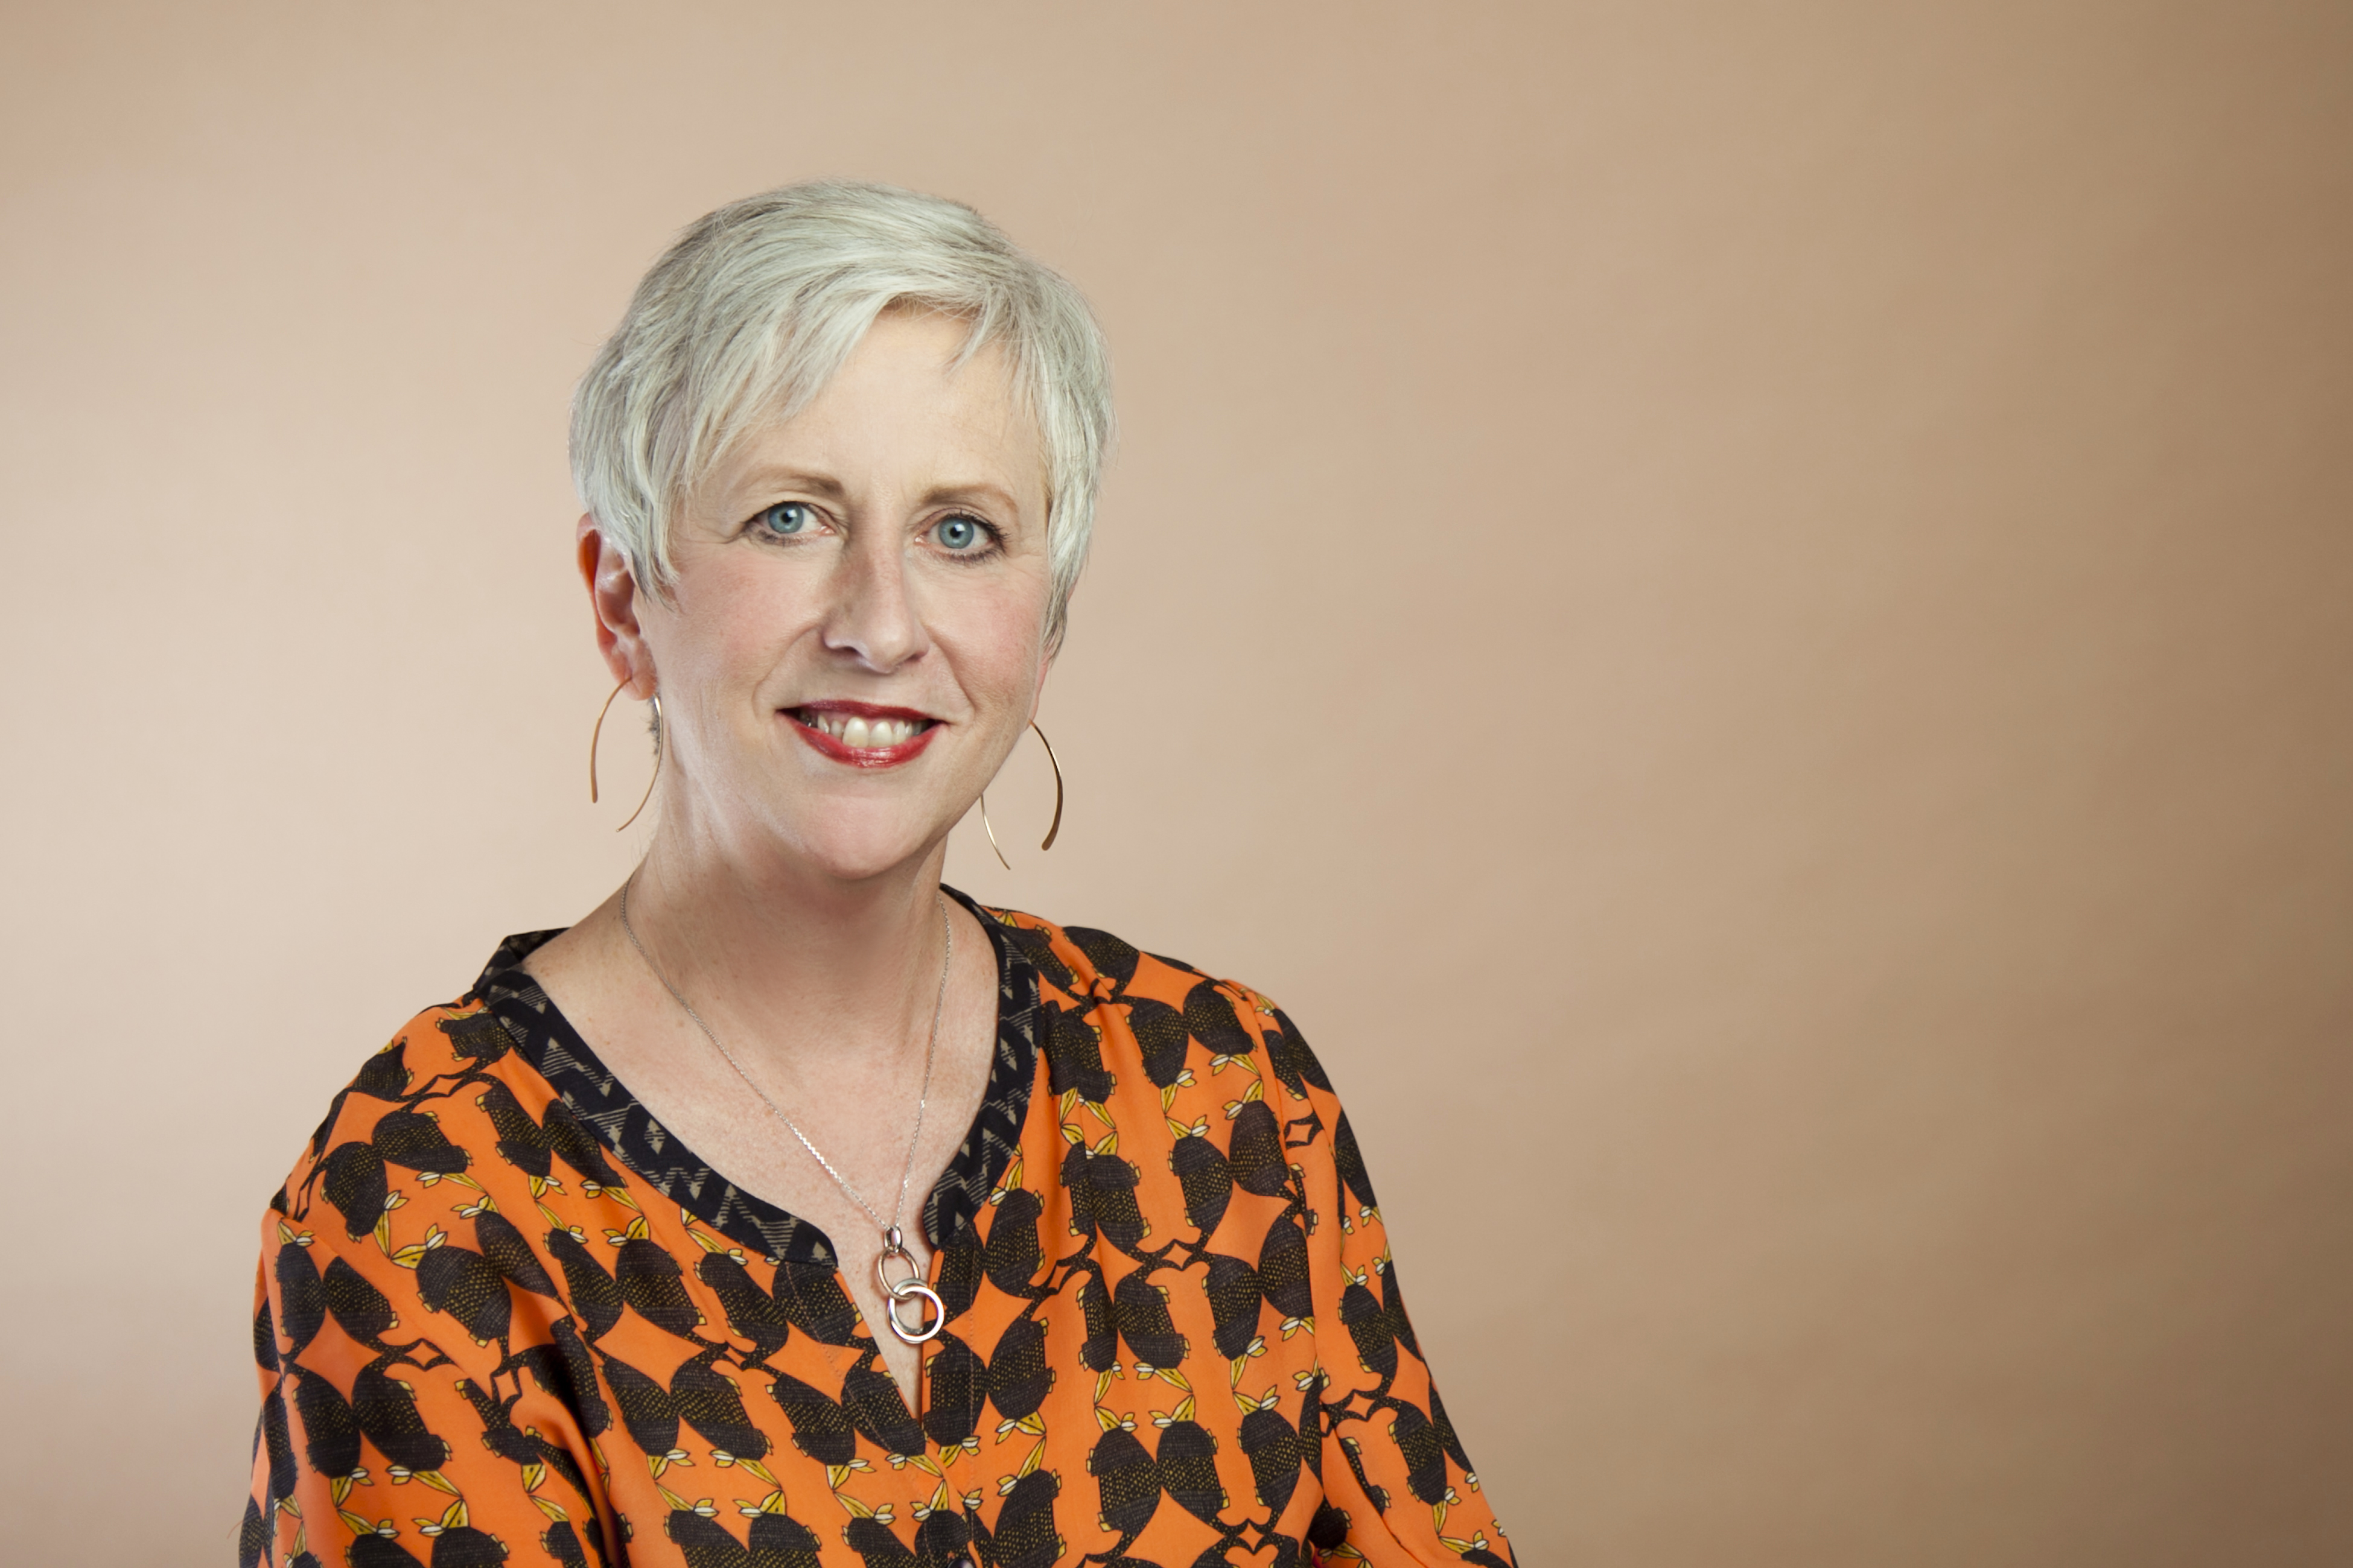 This is a photo of Teresa Bonner of Aroha Philanthropies. Teresa is seated and wearing a print top. She has short platinum hair.